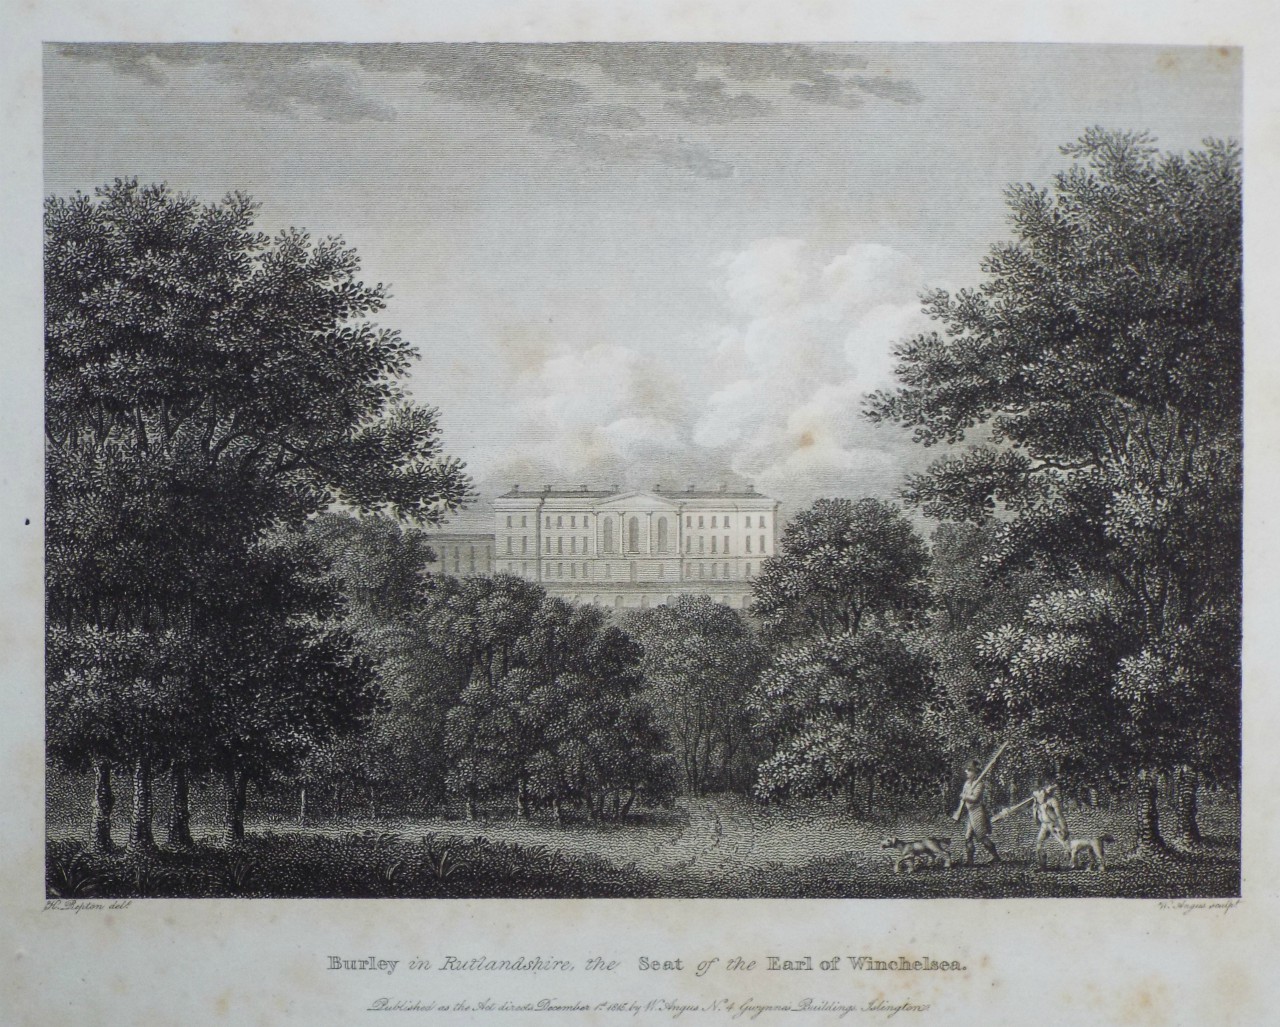 Print - Burley in Rutlandshire, the Seat of the Earl of Winchelsea. - Angus